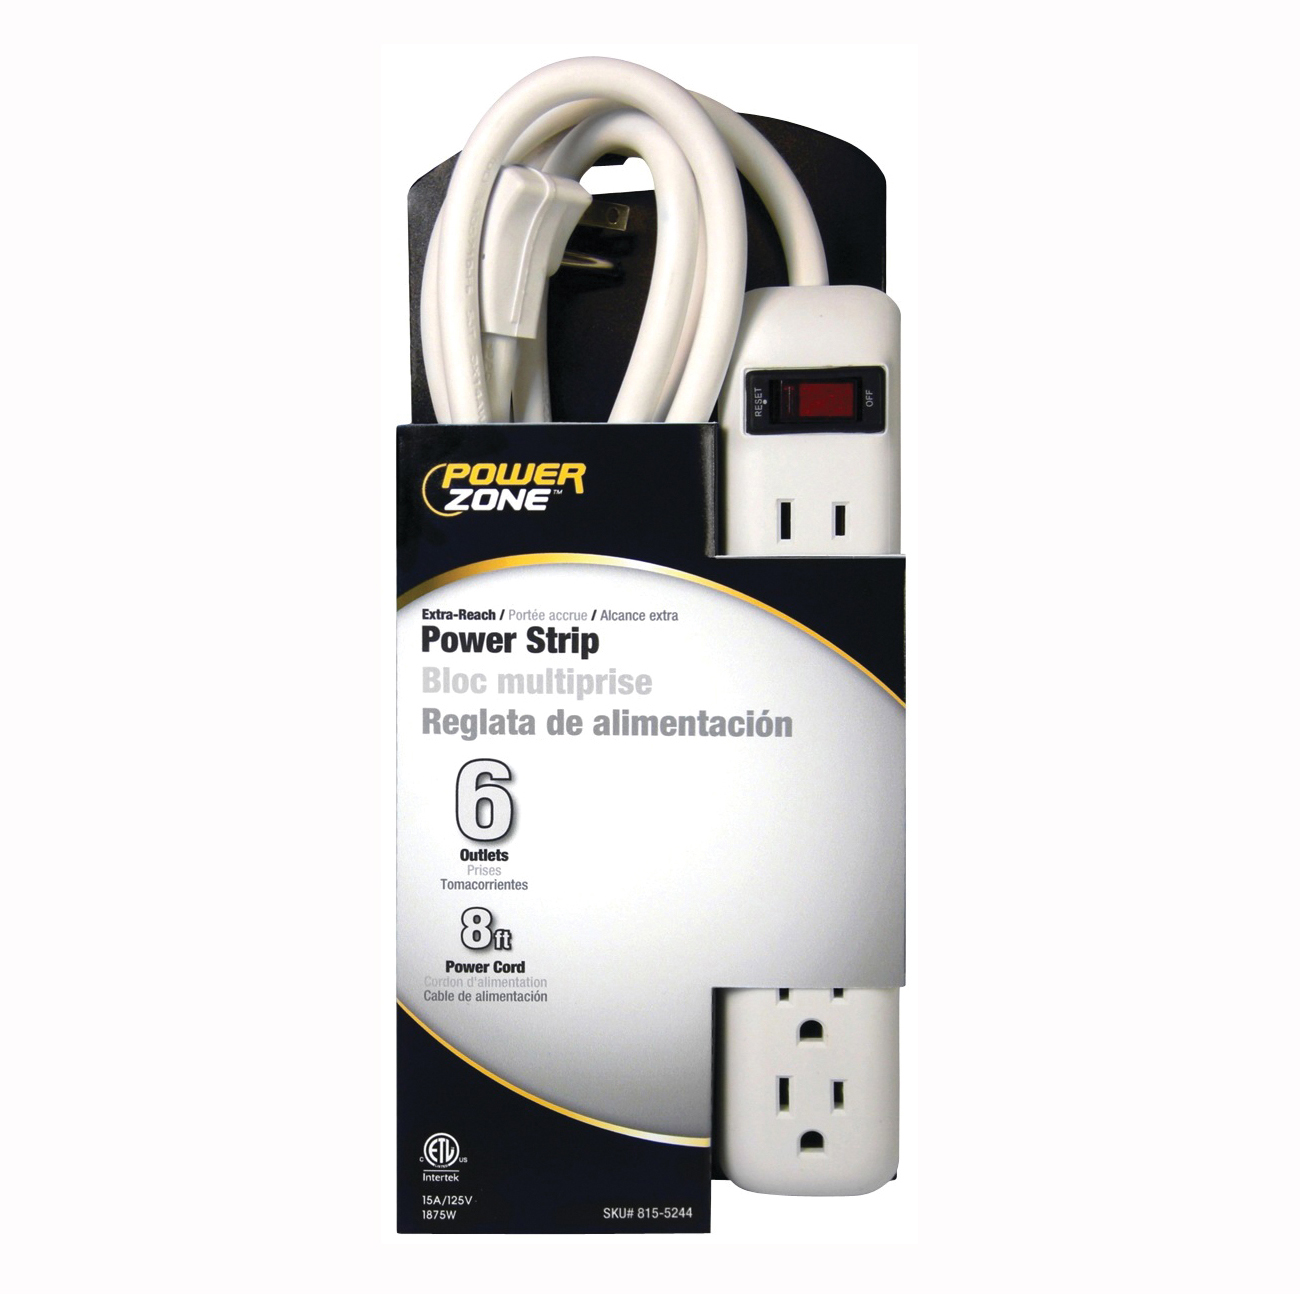 PowerZone OR801115 Power Outlet Strip, 6-Socket, 15 A, 8 ft L Cable, White - 2